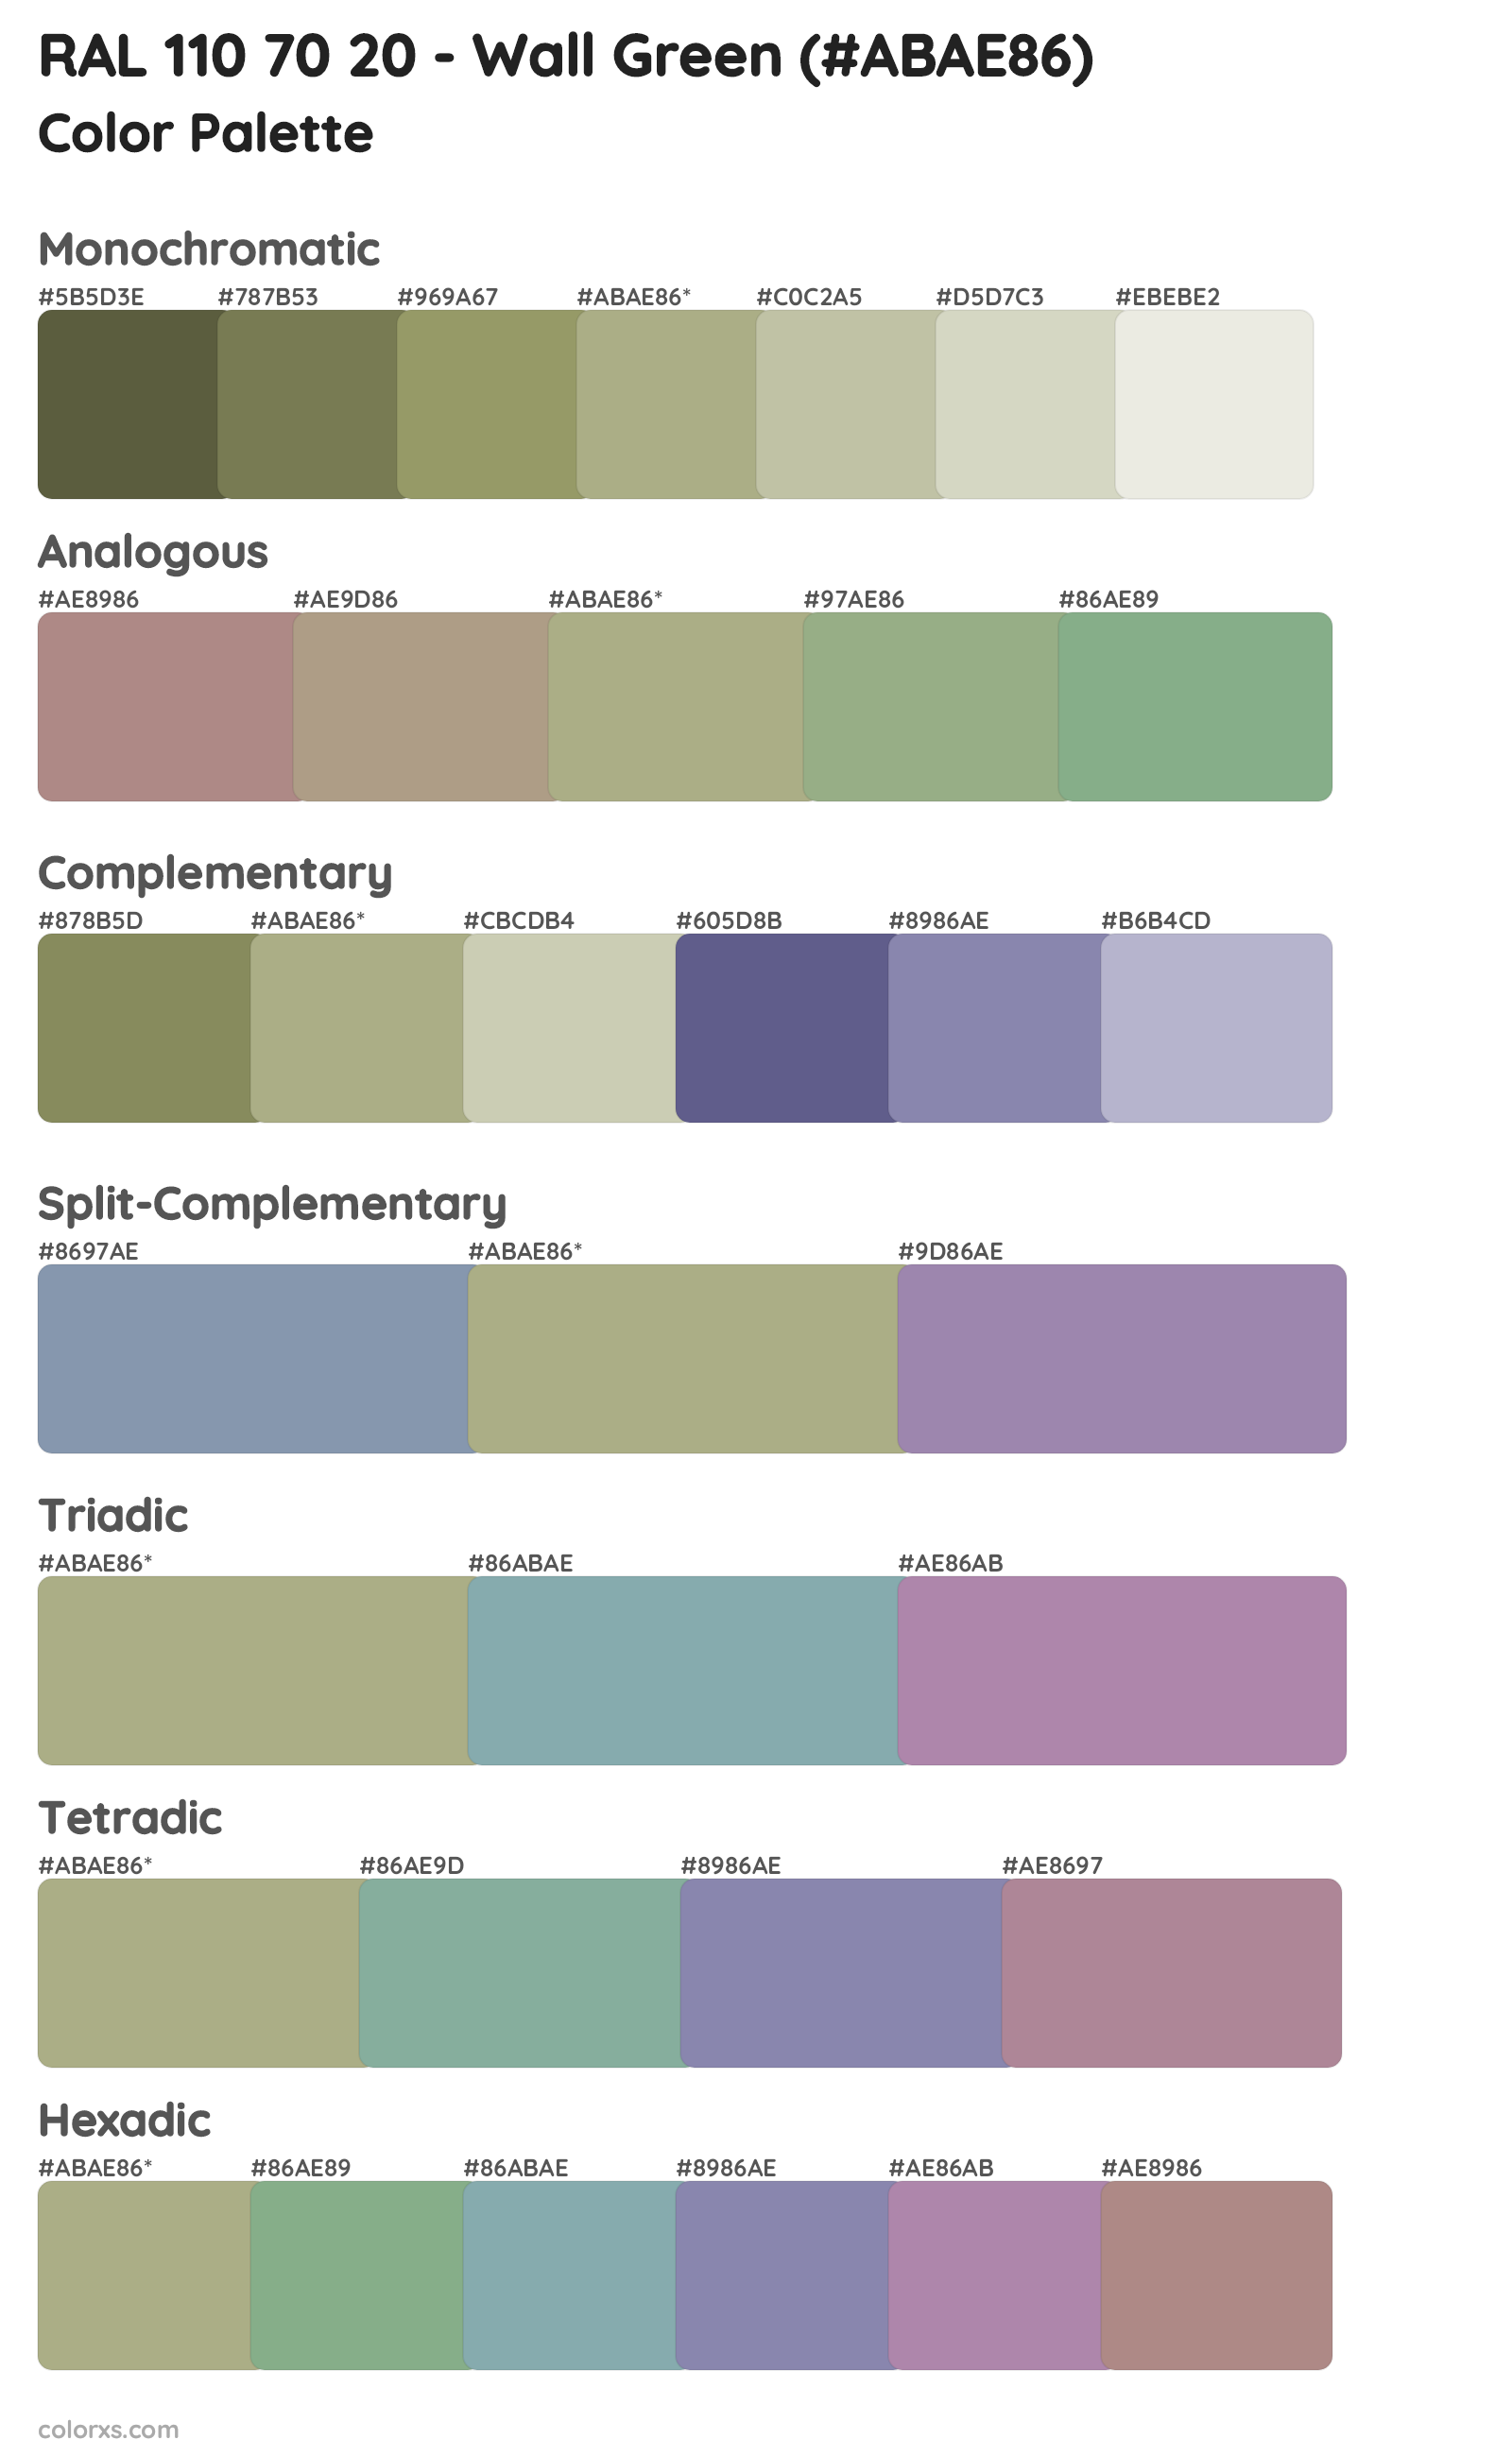 RAL 110 70 20 - Wall Green Color Scheme Palettes